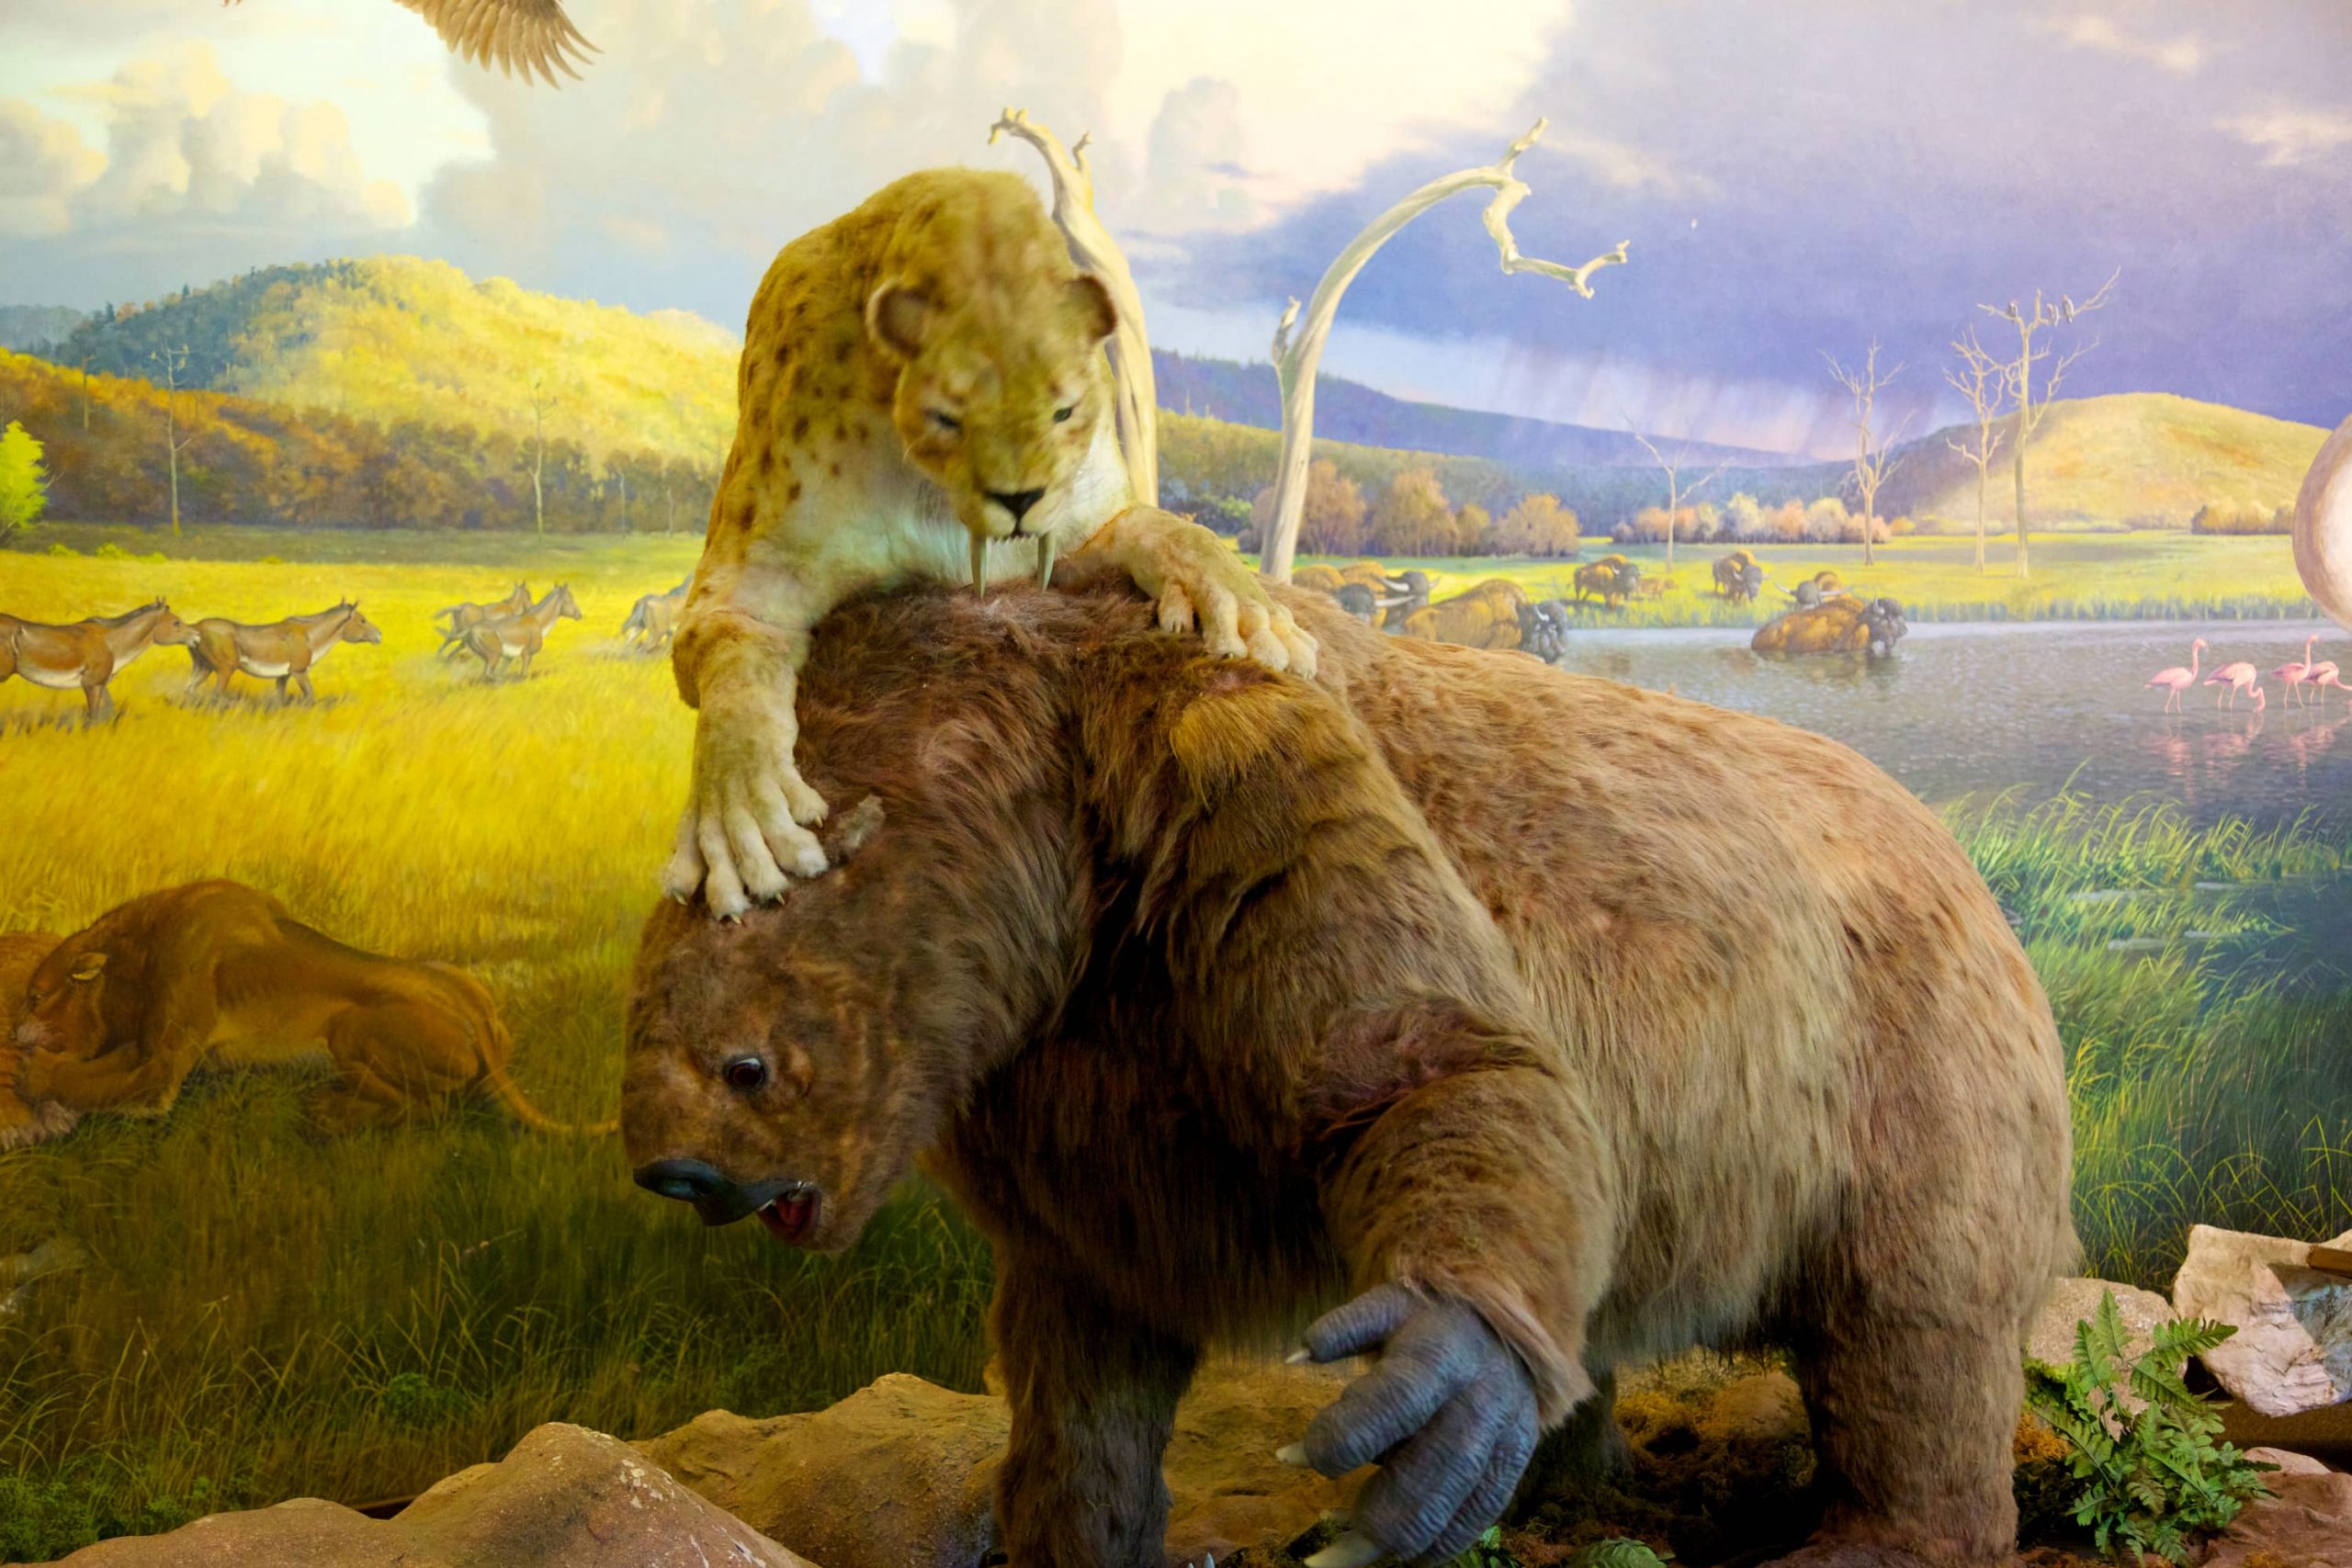 Giant sloth being attacked by saber-tooth tiger